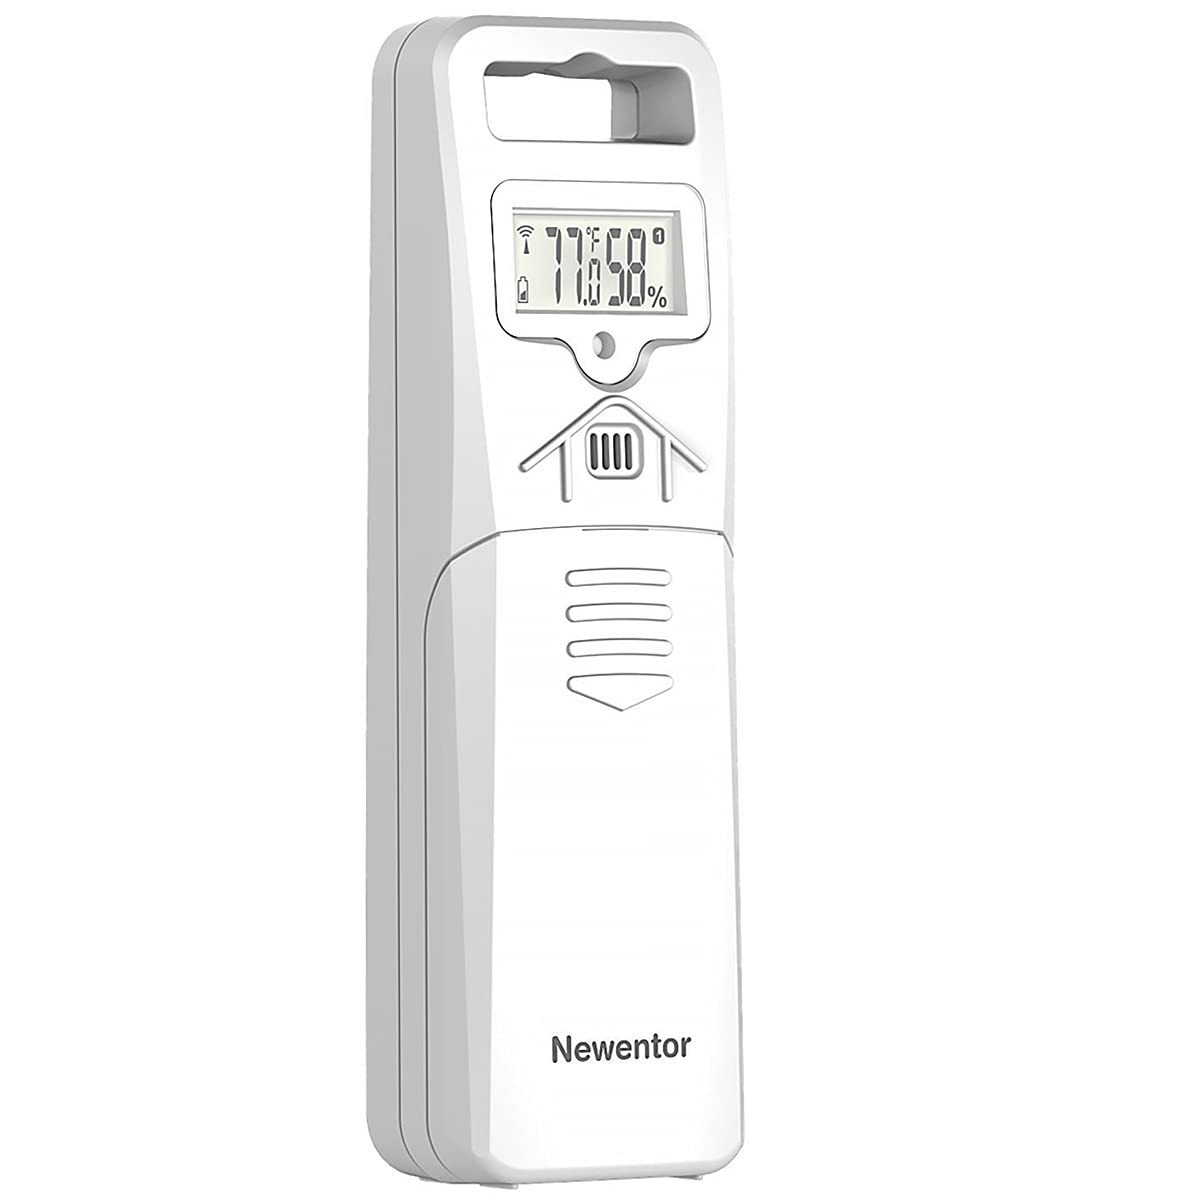 Newentor Indoor Outdoor Thermometer Wireless, Remote Temperature